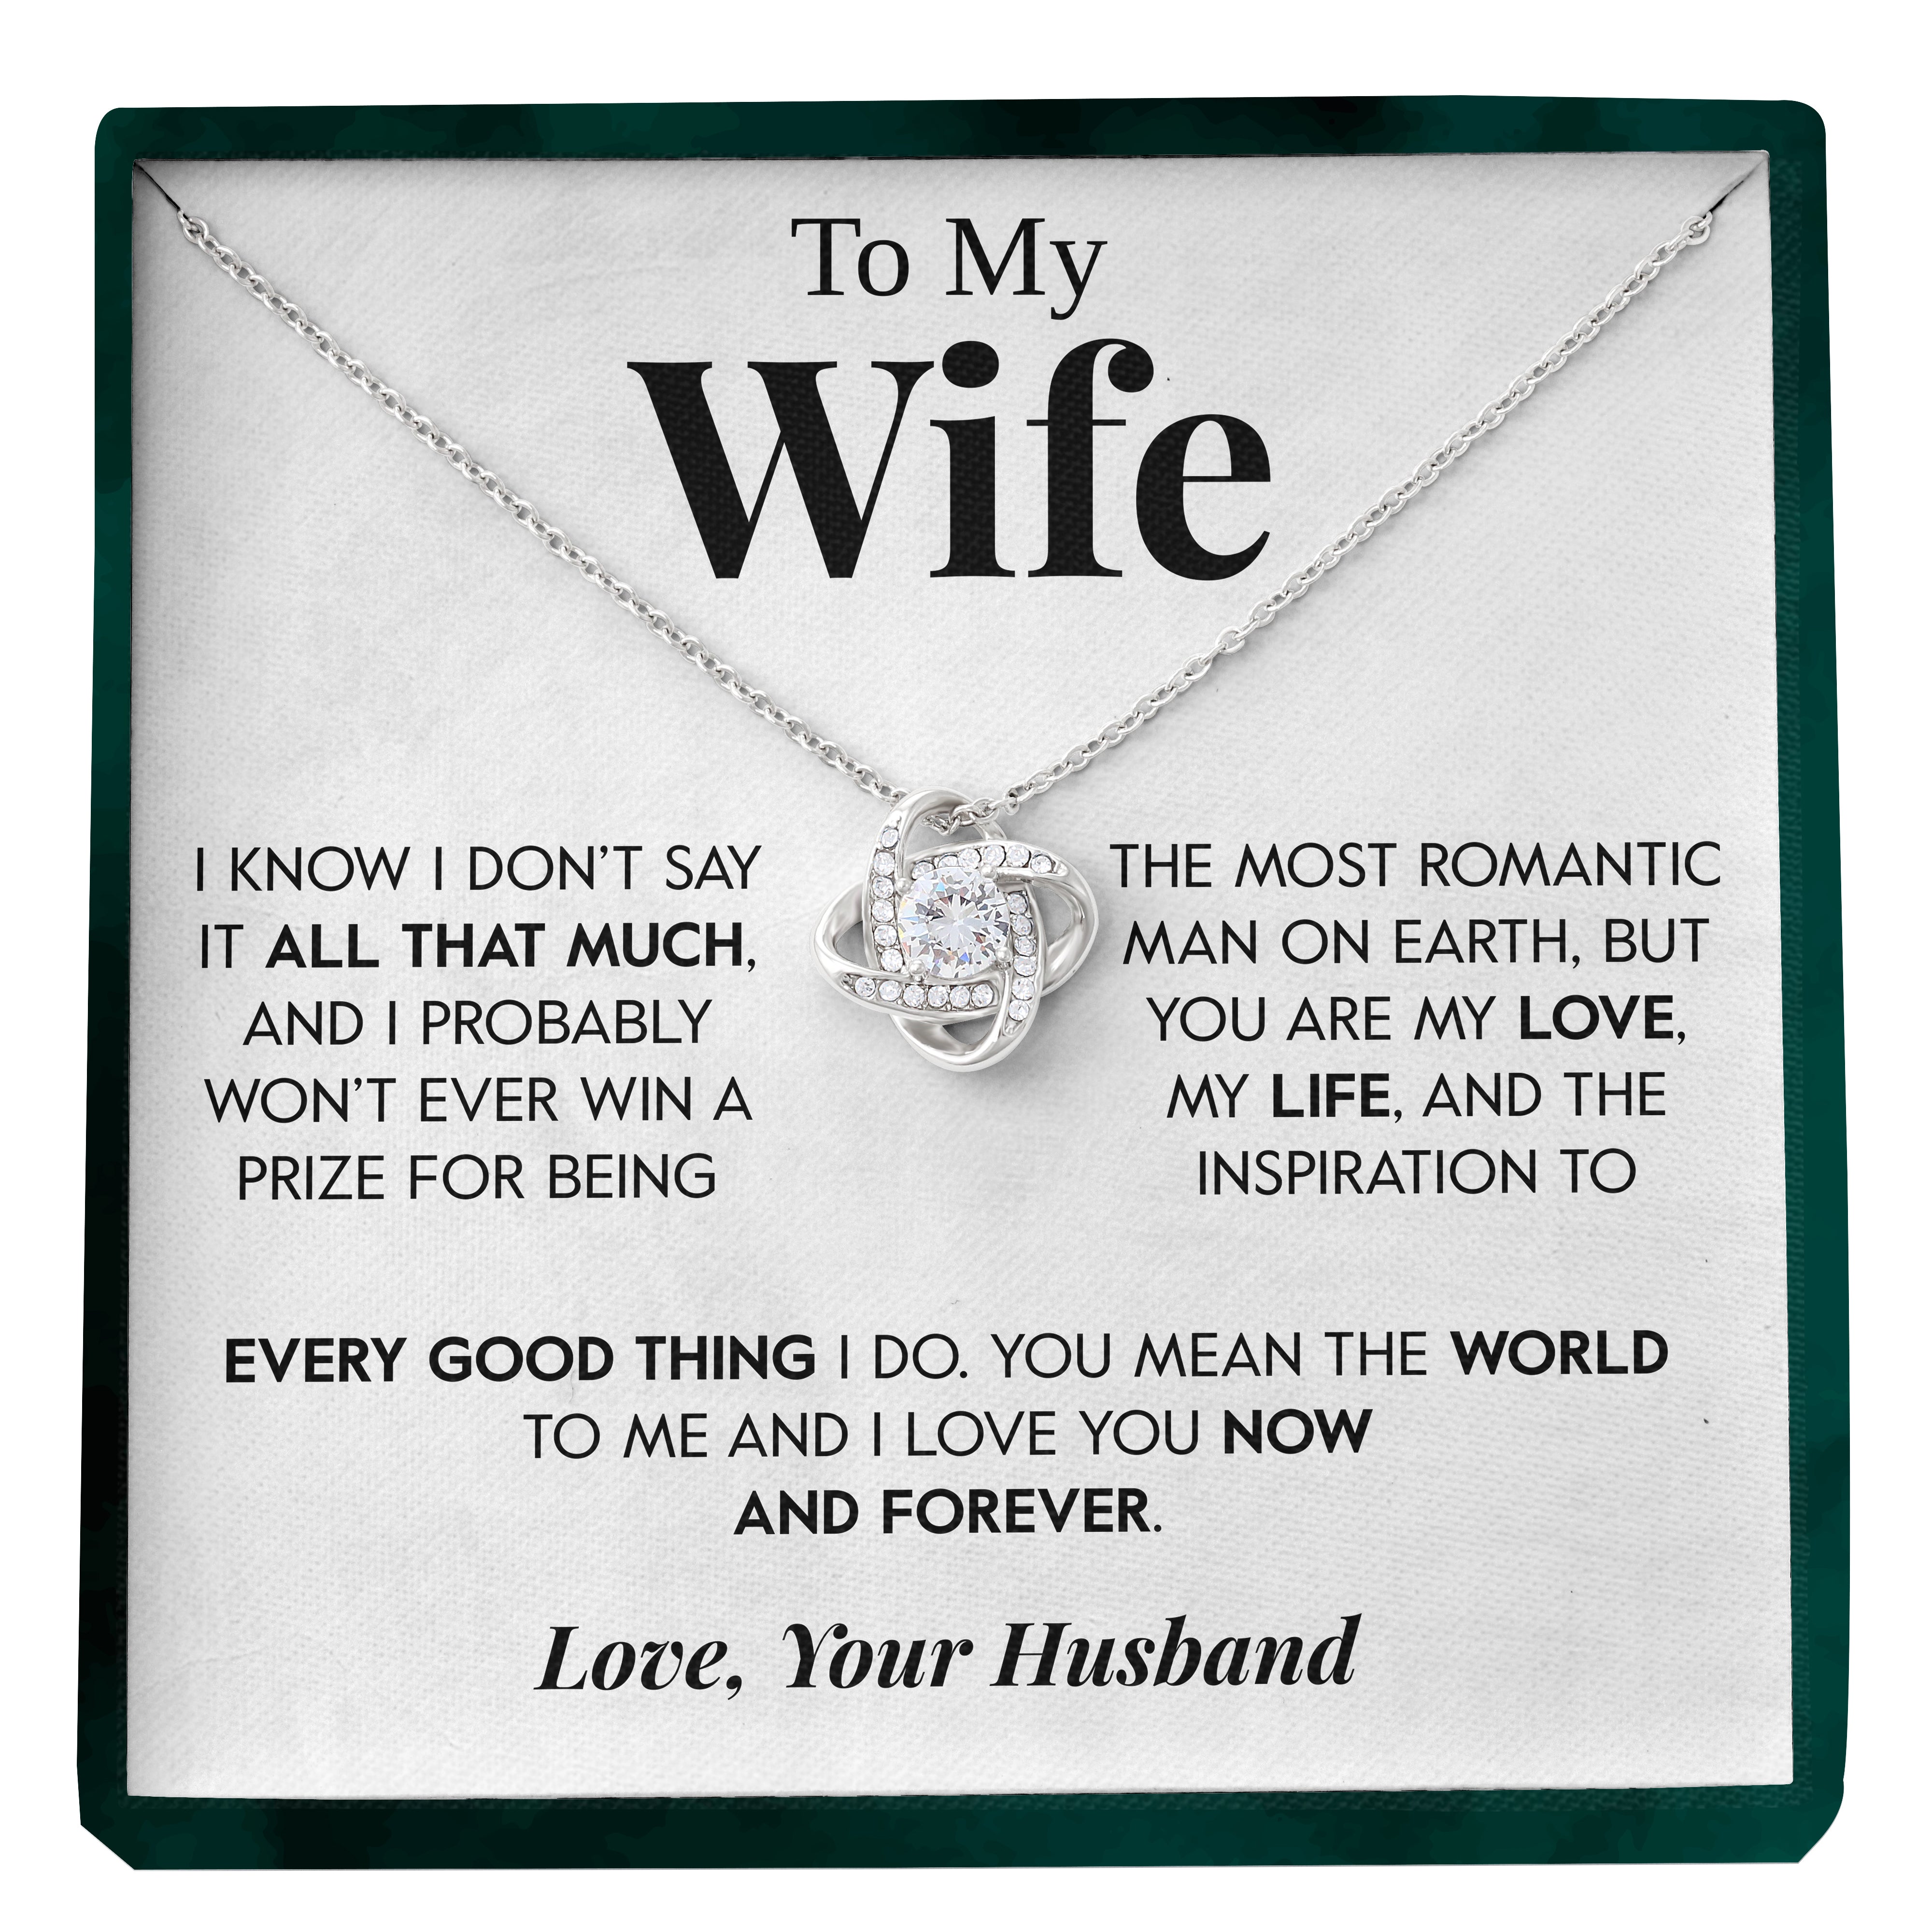 To My Wife | "Every Good Thing" | Love Knot Necklace